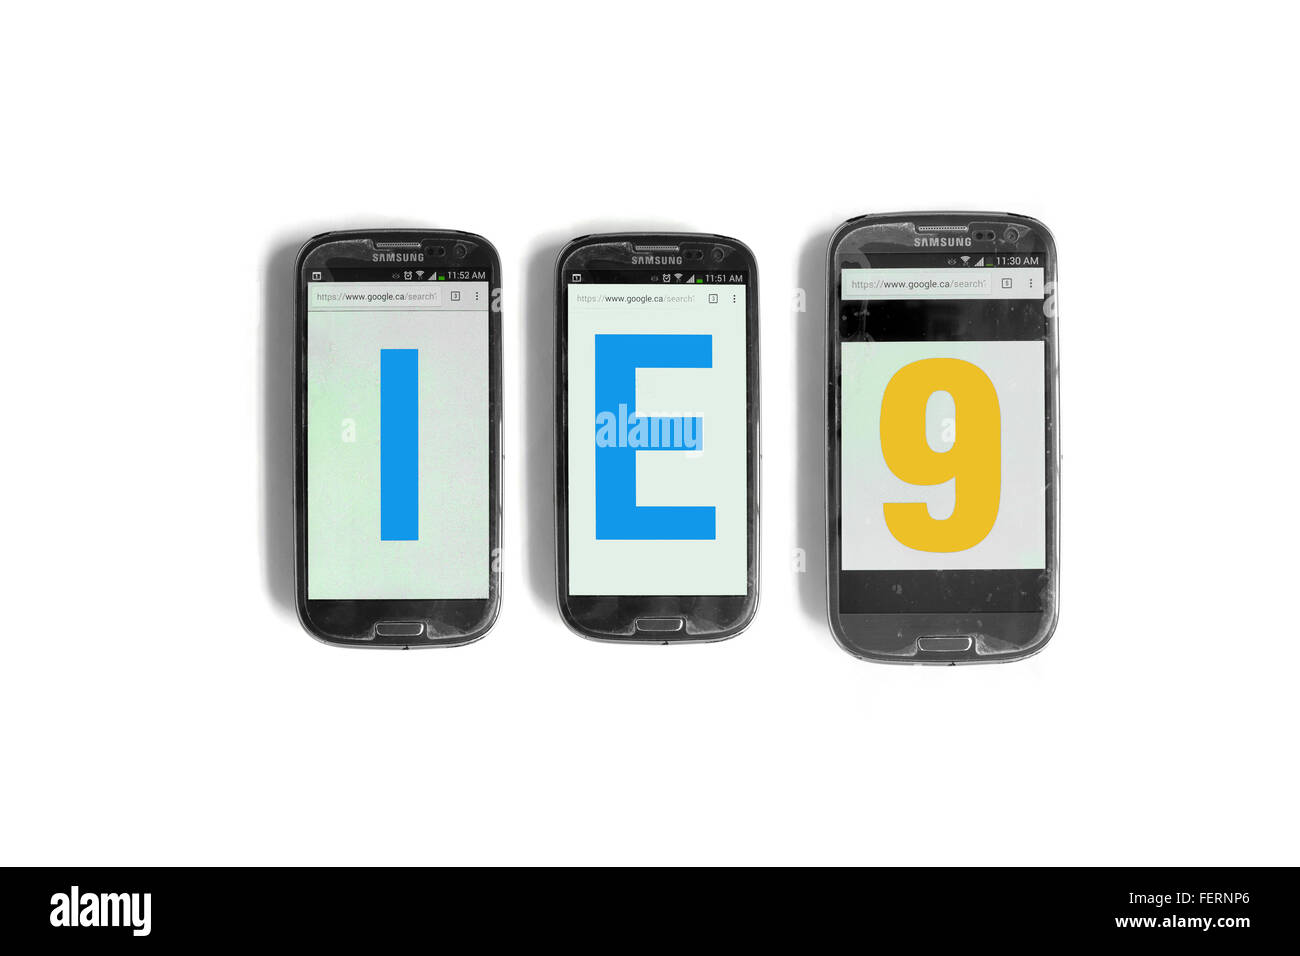 IE9 on the screens of smartphones photographed against a  white background. Stock Photo